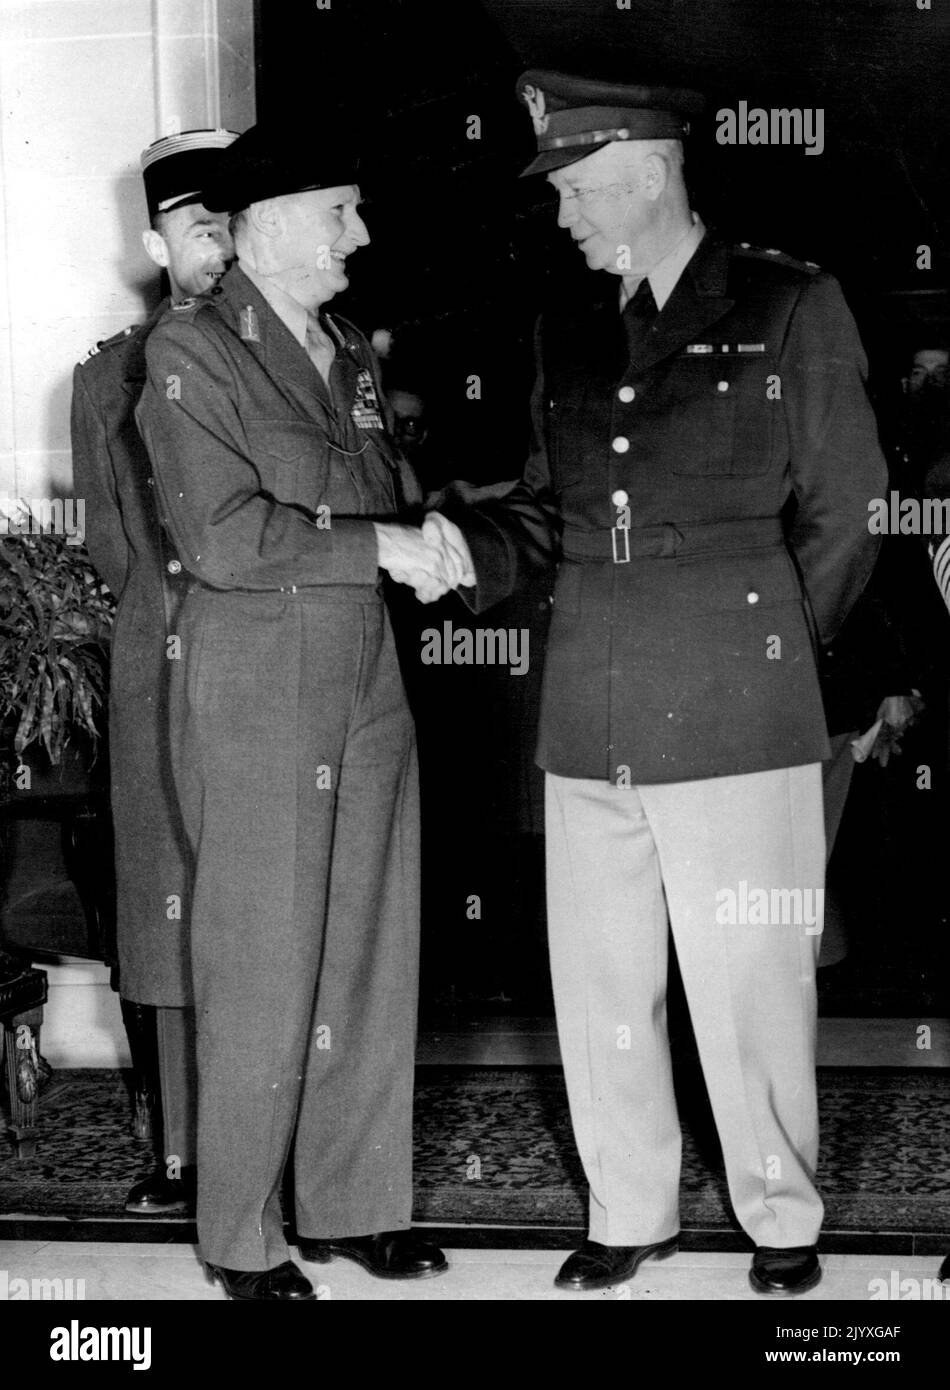 Eisenhower And Monty Meet In Paris - General Eisenhower (right) shaking hands with Field-Marshal Viscount Montgomery after the arrival of the Supreme Commander of the North Atlantic Treaty forces here. Their meeting took place at the Hotel Raphael. Figure partly hidden is that of Lt. Col. Costa de Beauregarde, the Field Marshal's aide. General Eisenhower is making a tour of the United Pact nations whose armies he will command. January 08, 1951. Stock Photo